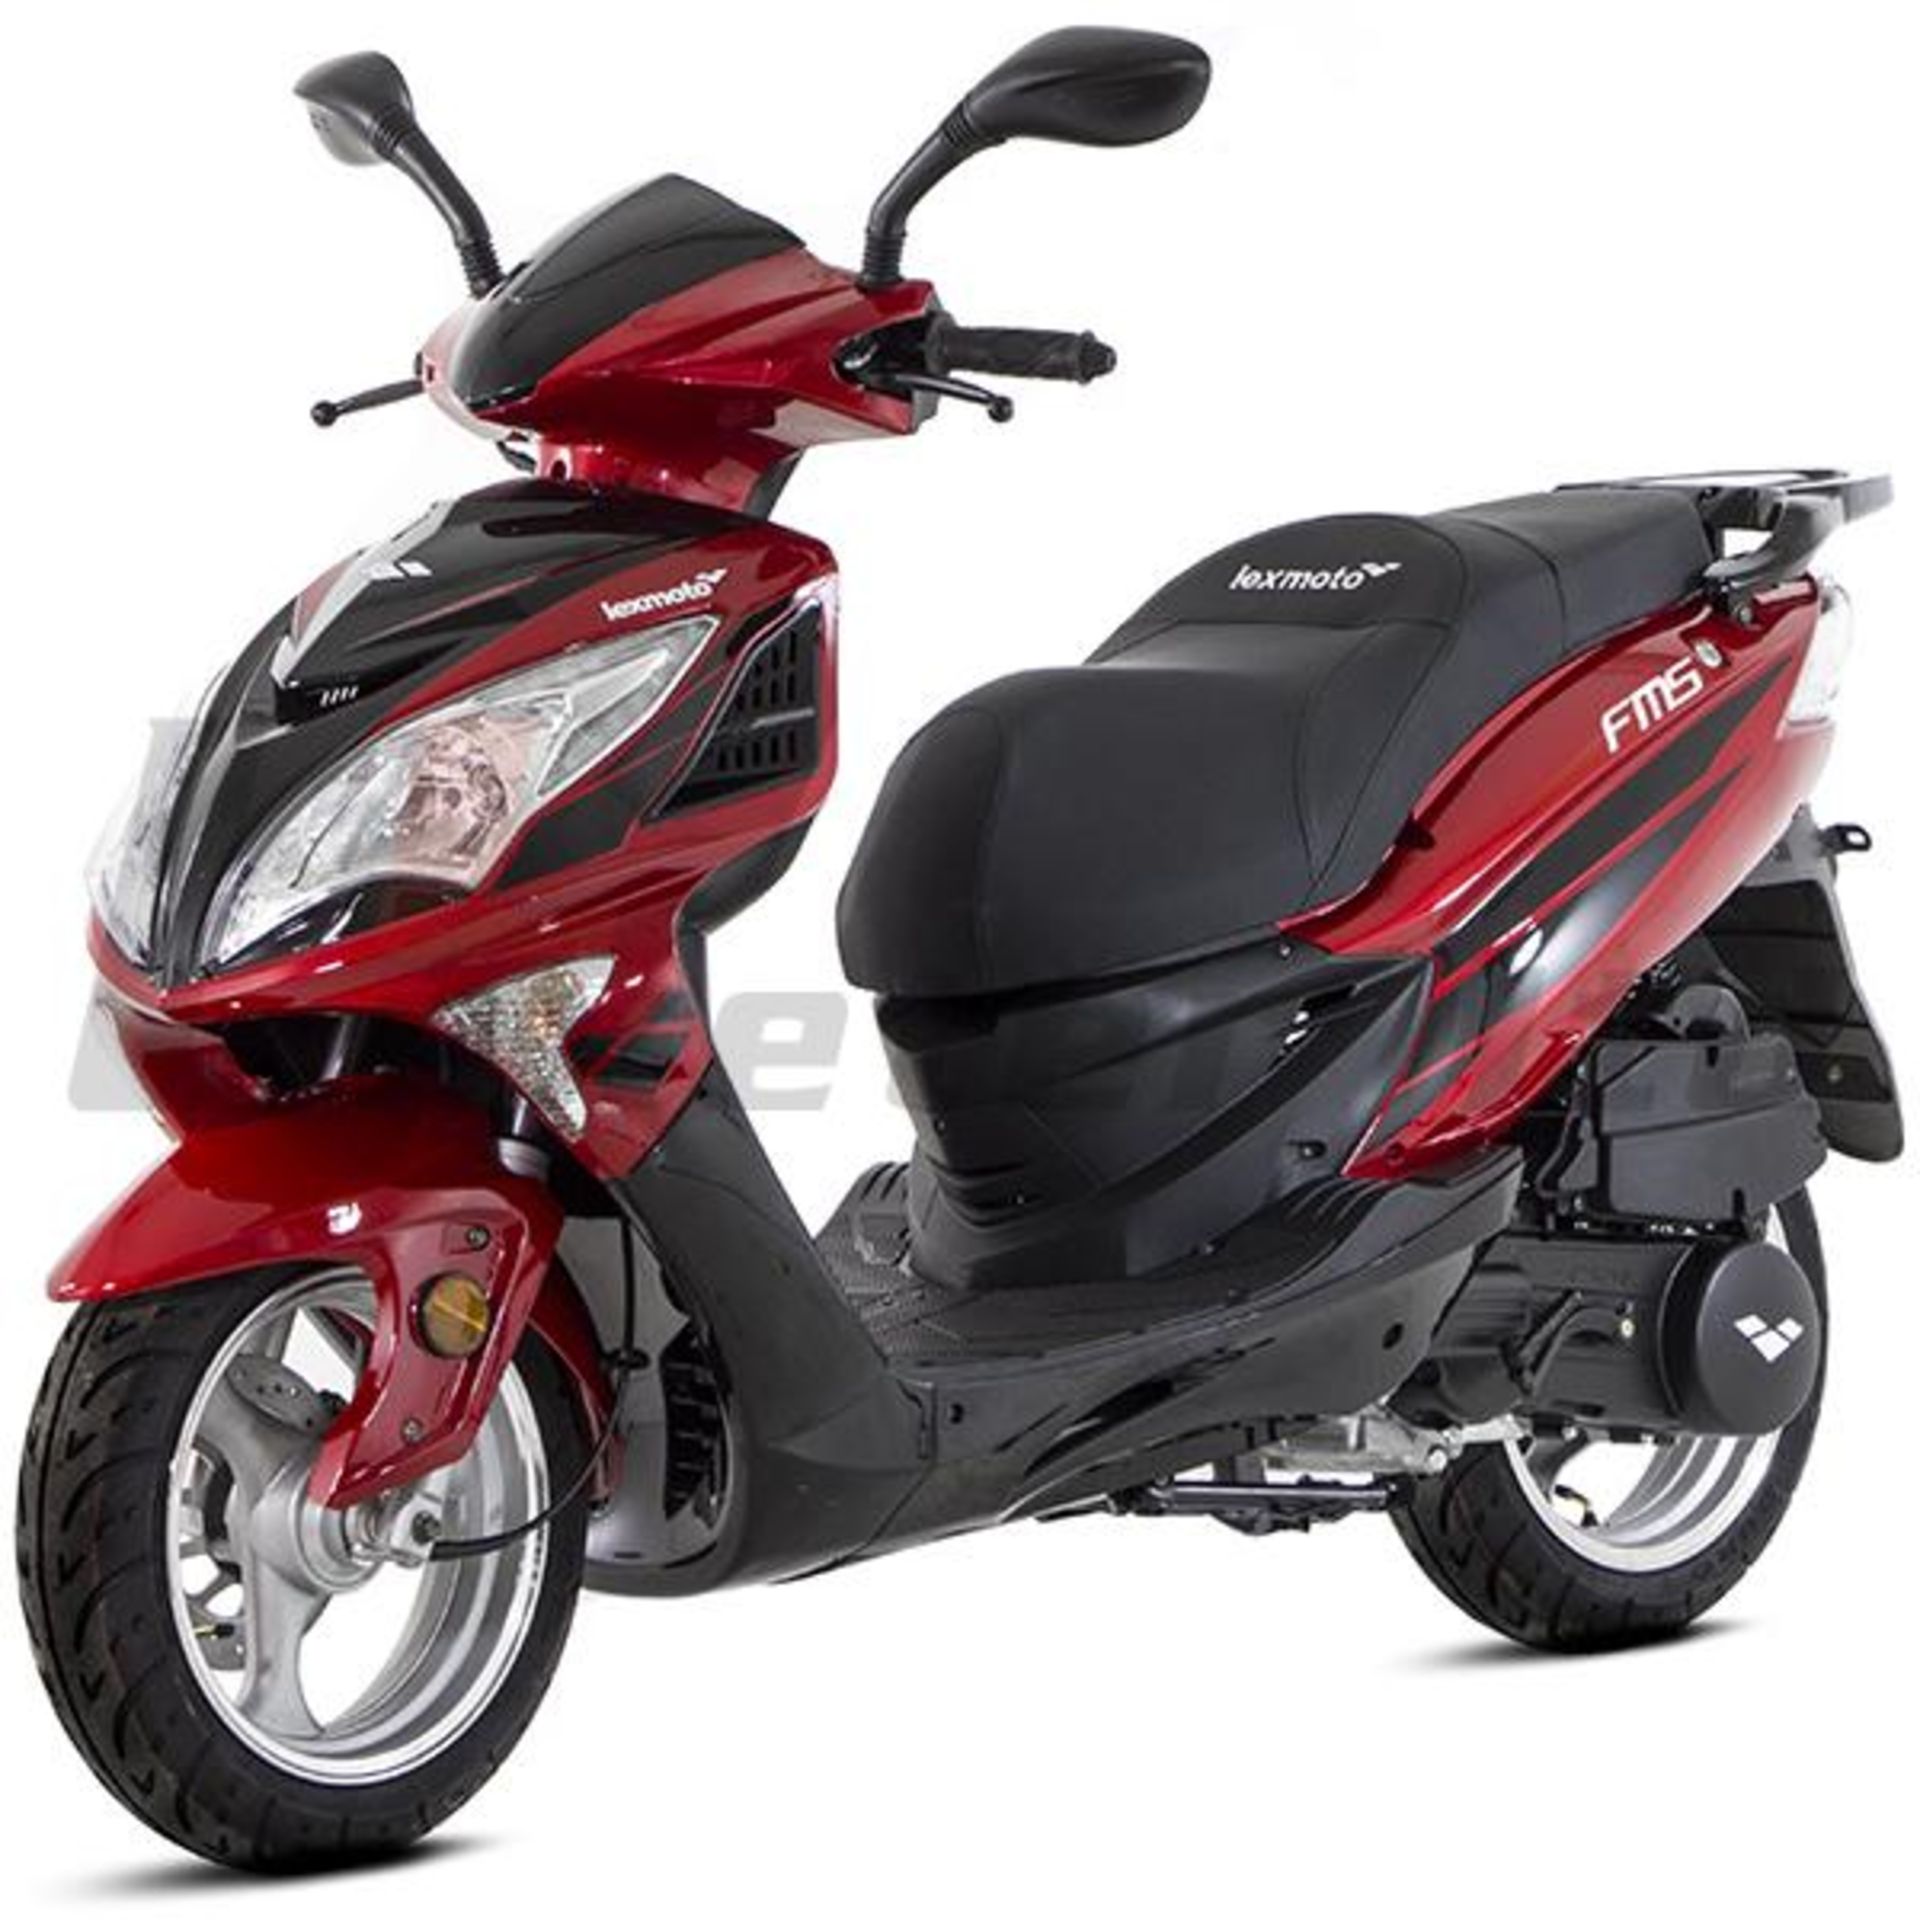 BRAND NEW IN BOX LEXMOTO FMS 125CC IN RED UN-REGISTERED